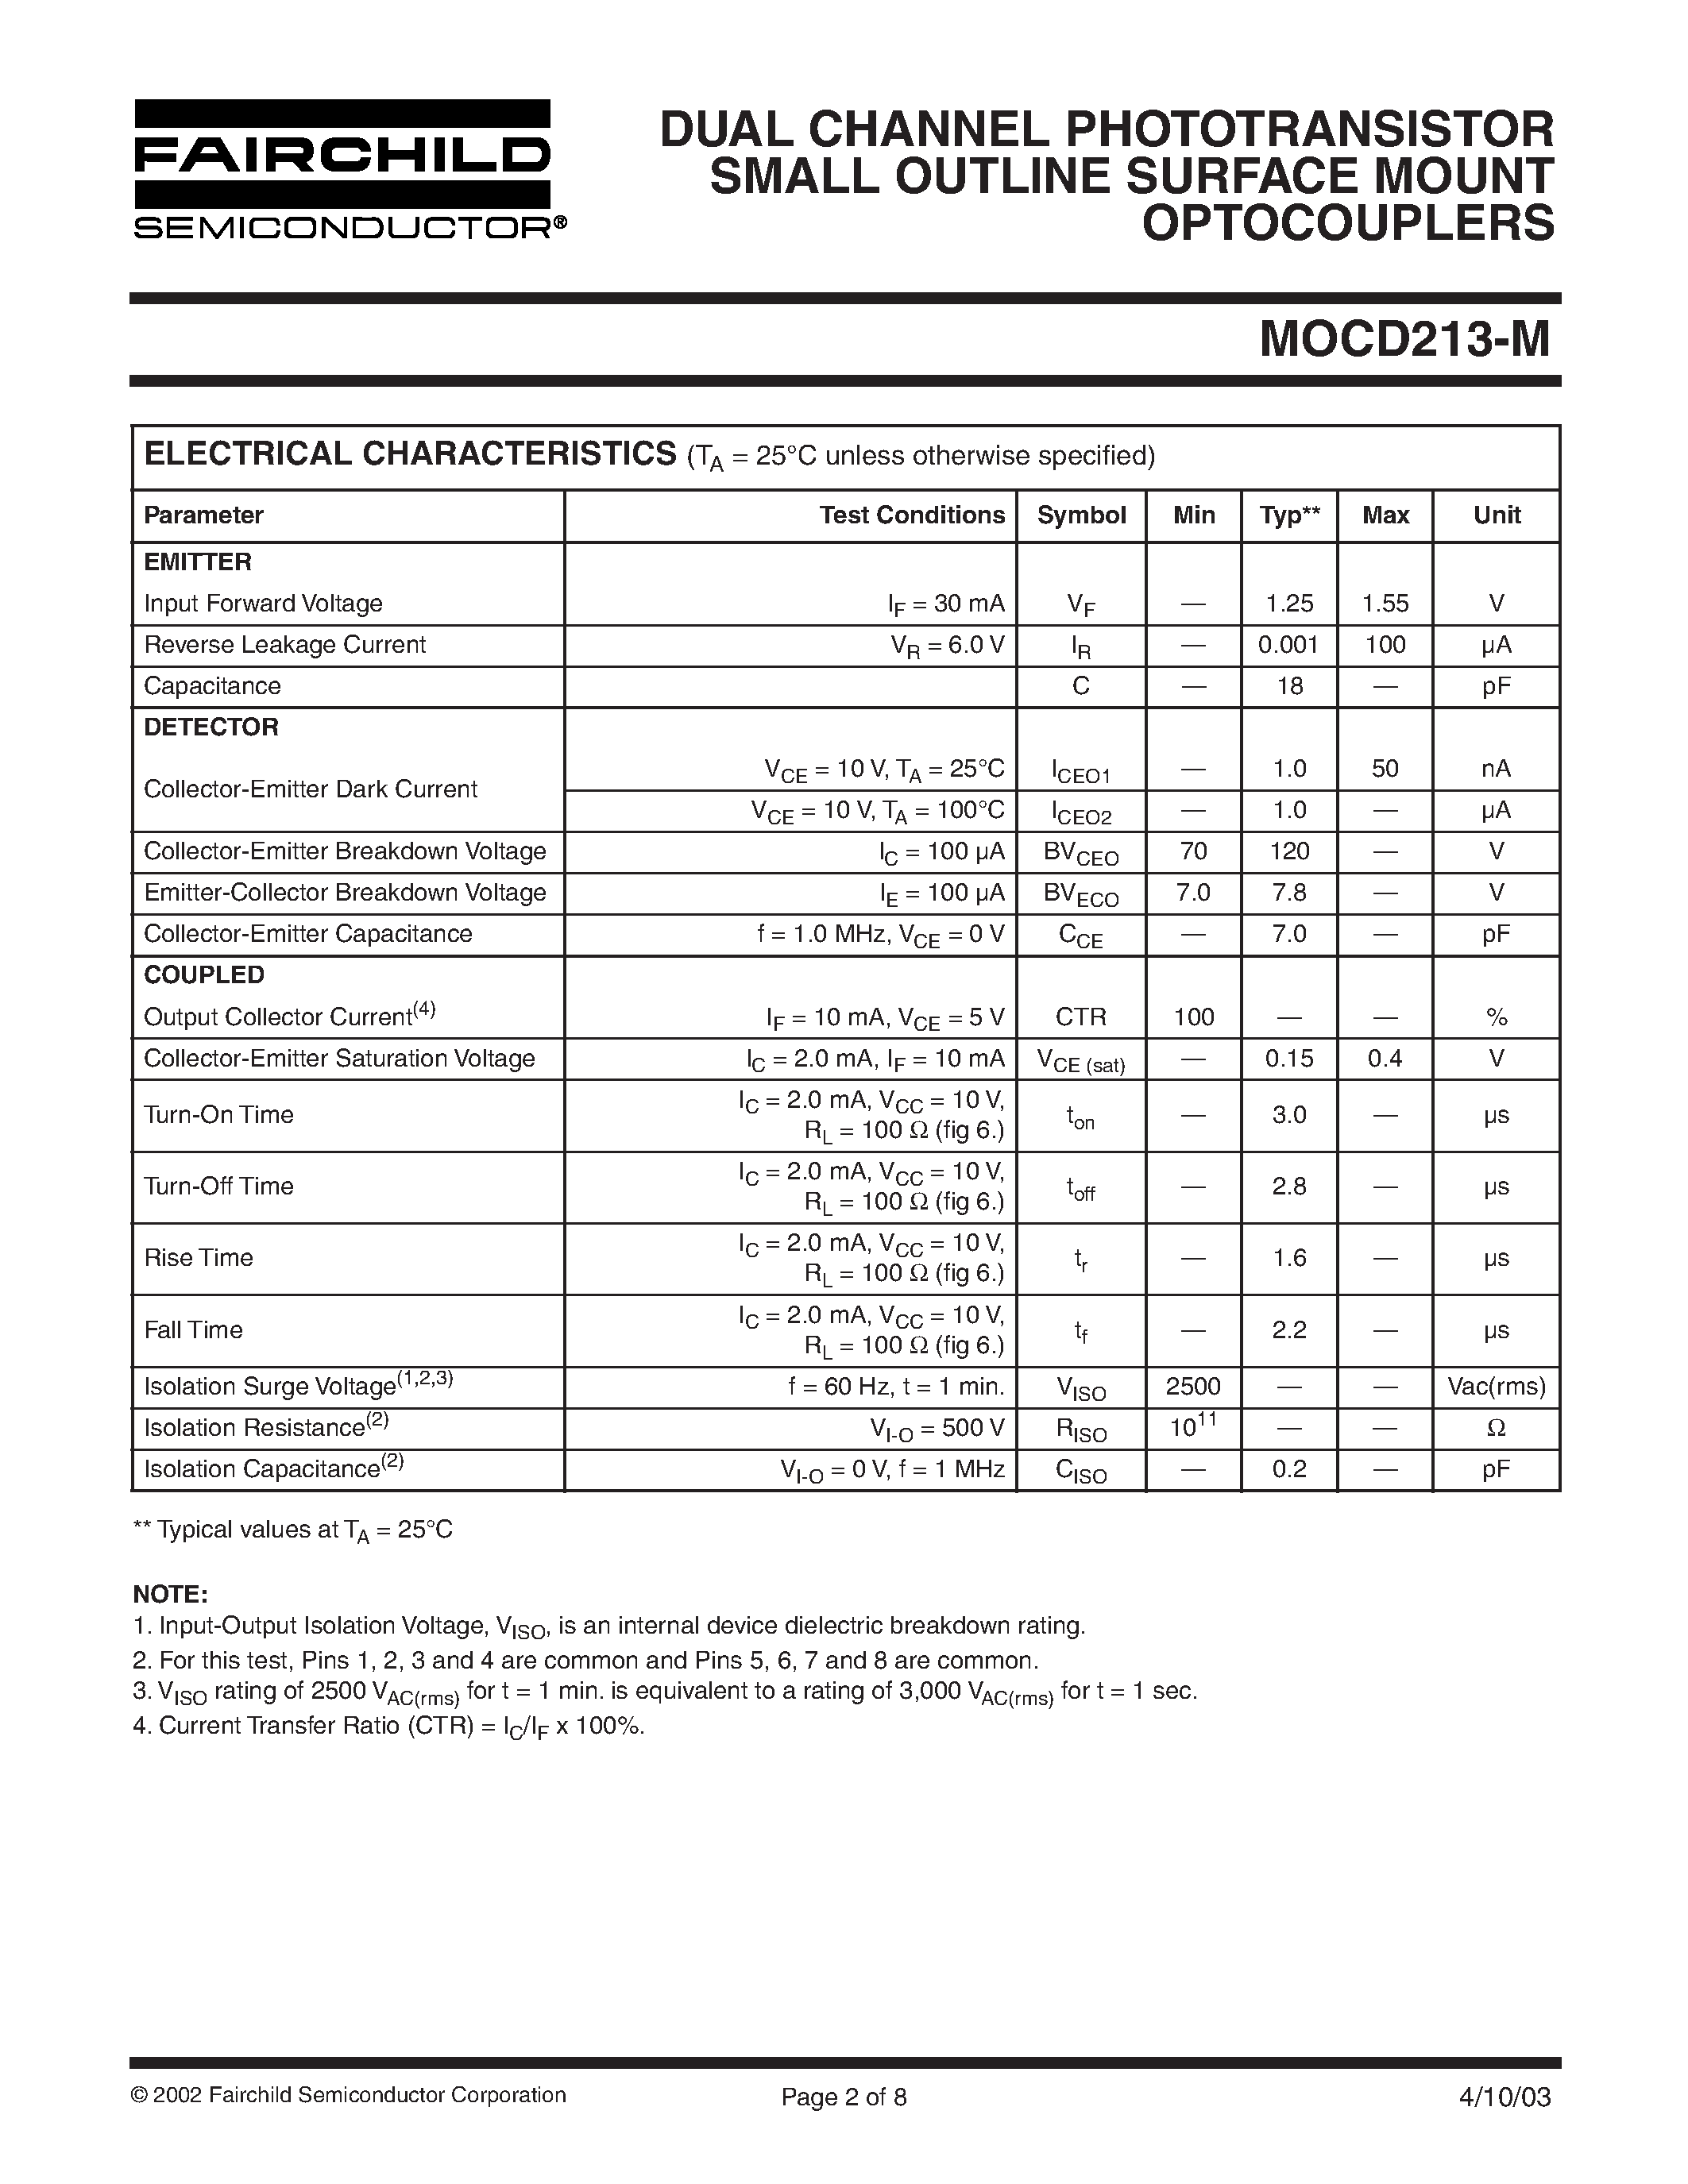 Datasheet MOCD213-M - DUAL CHANNEL PHOTOTRANSISTOR SMALL OUTLINE SURFACE MOUNT OPTOCOUPLERS page 2